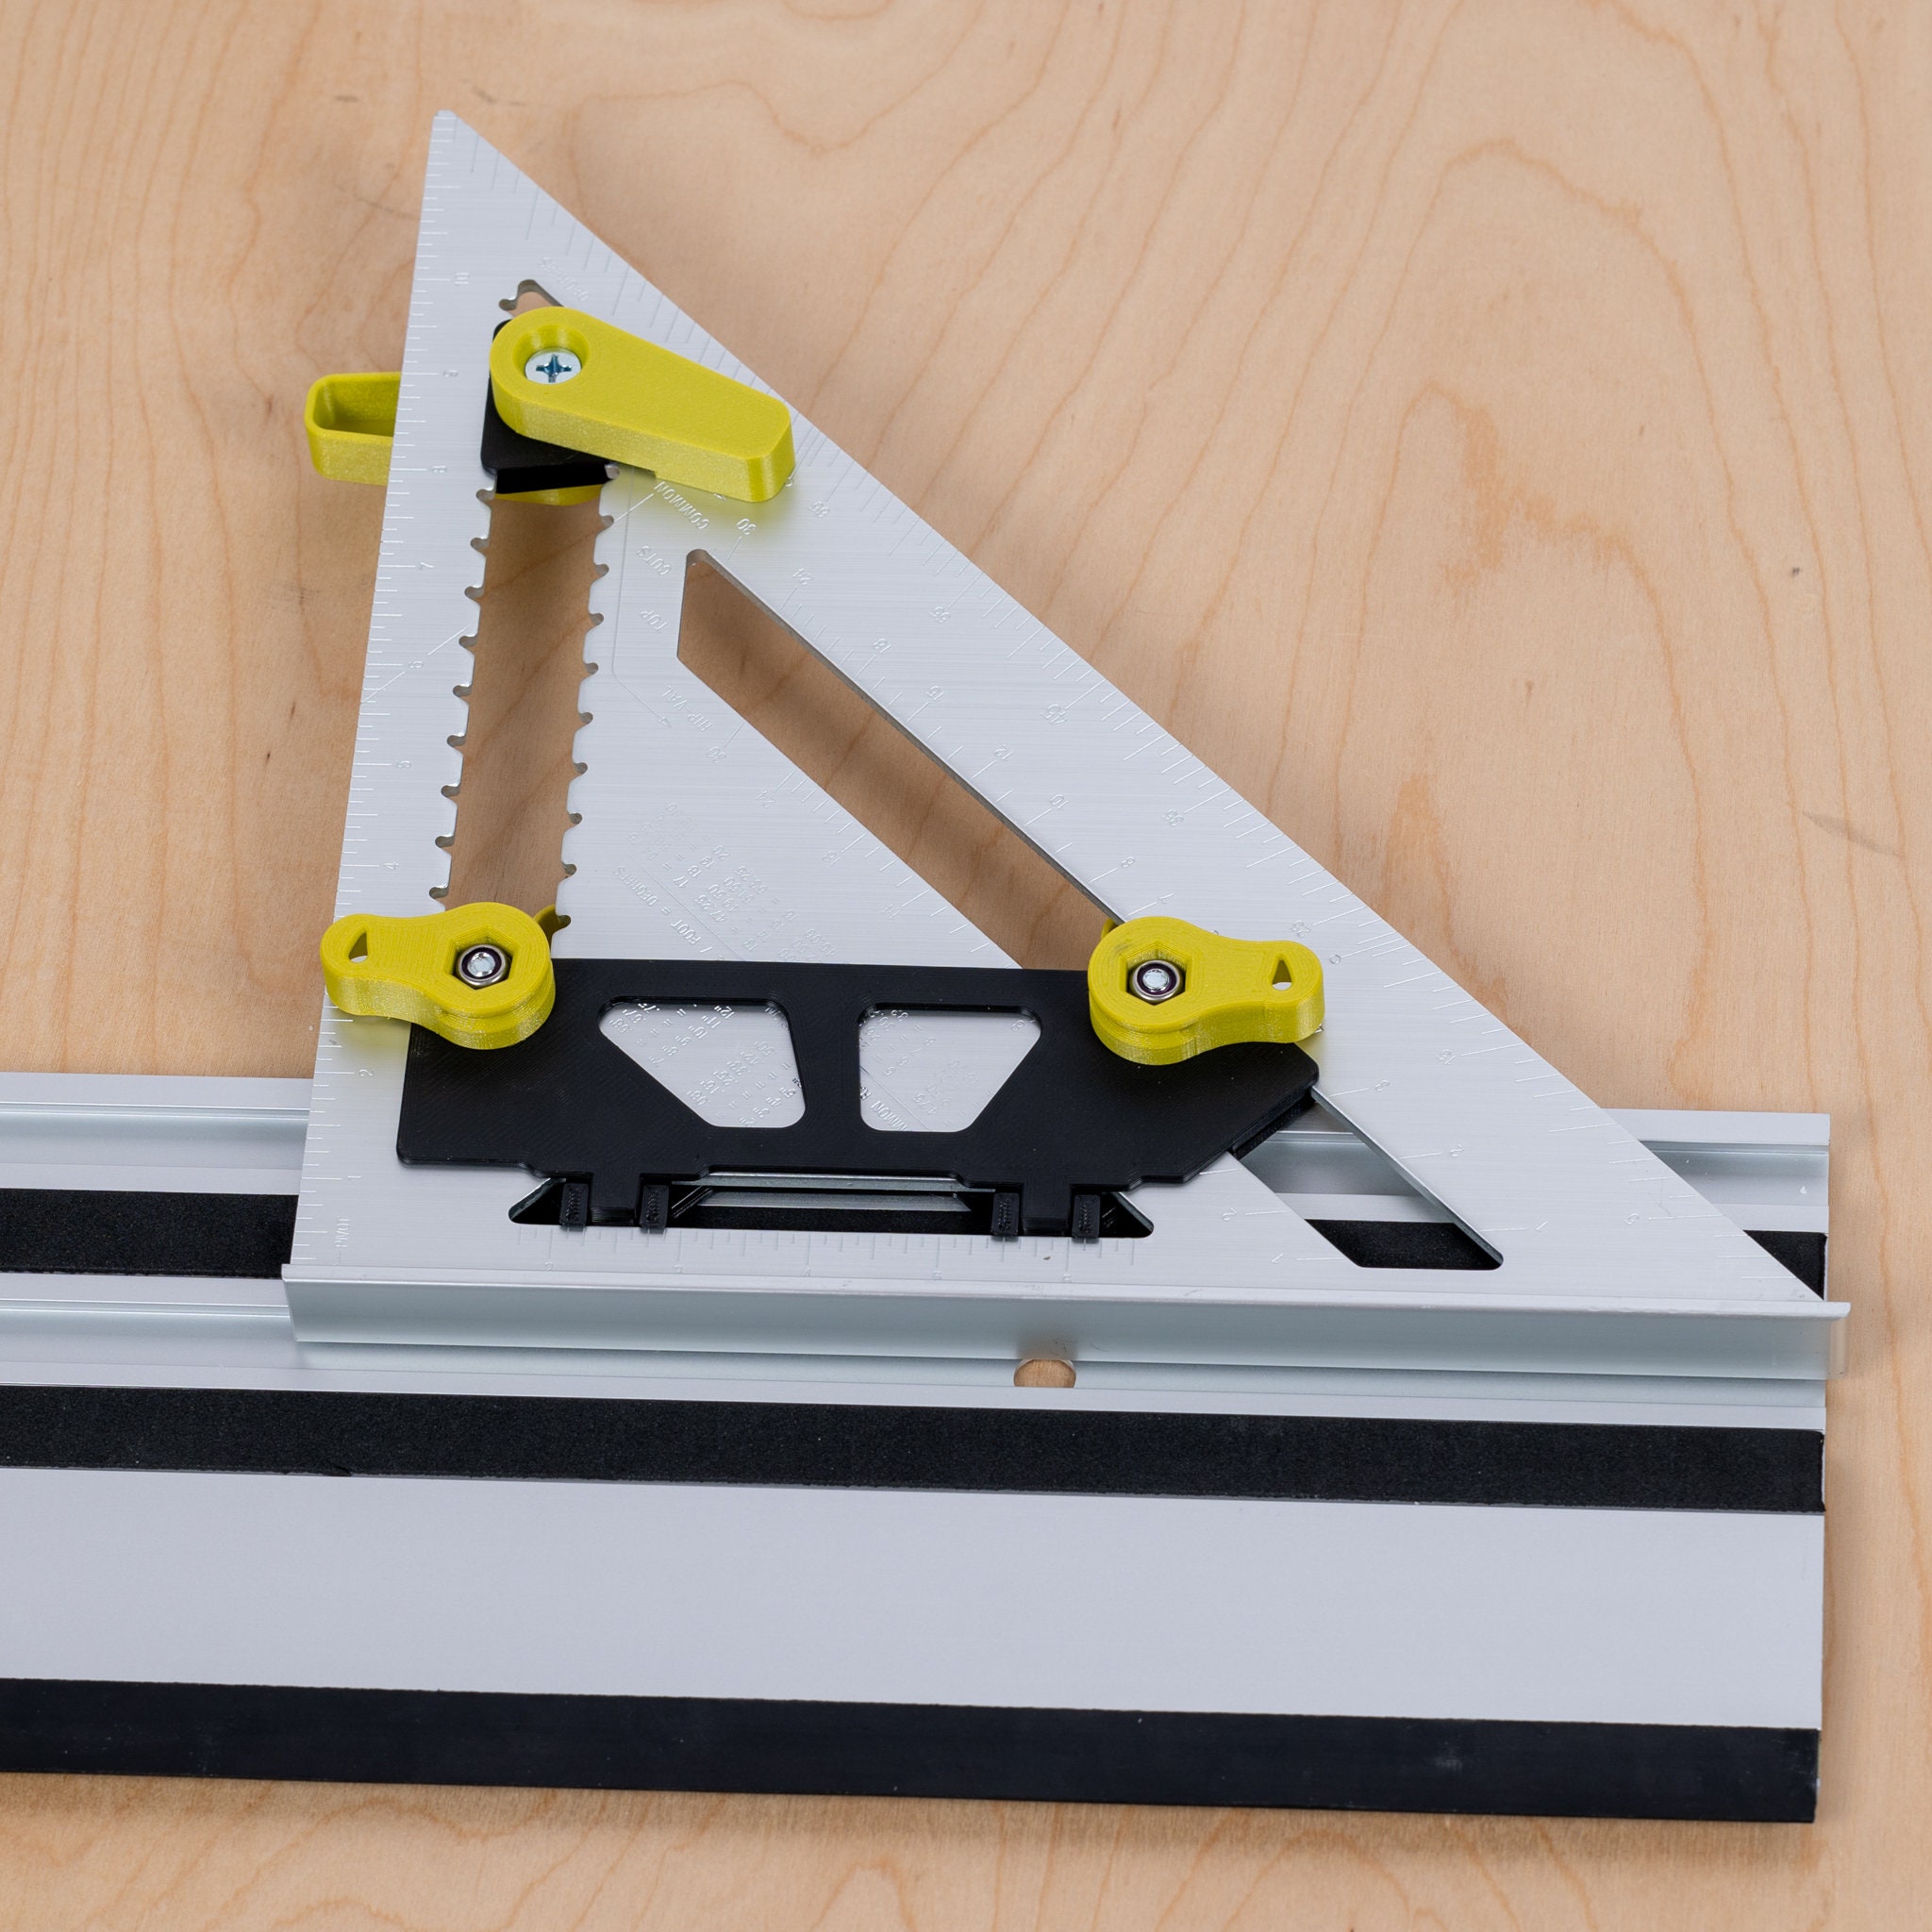 Triangle to Guide Rail Adapter